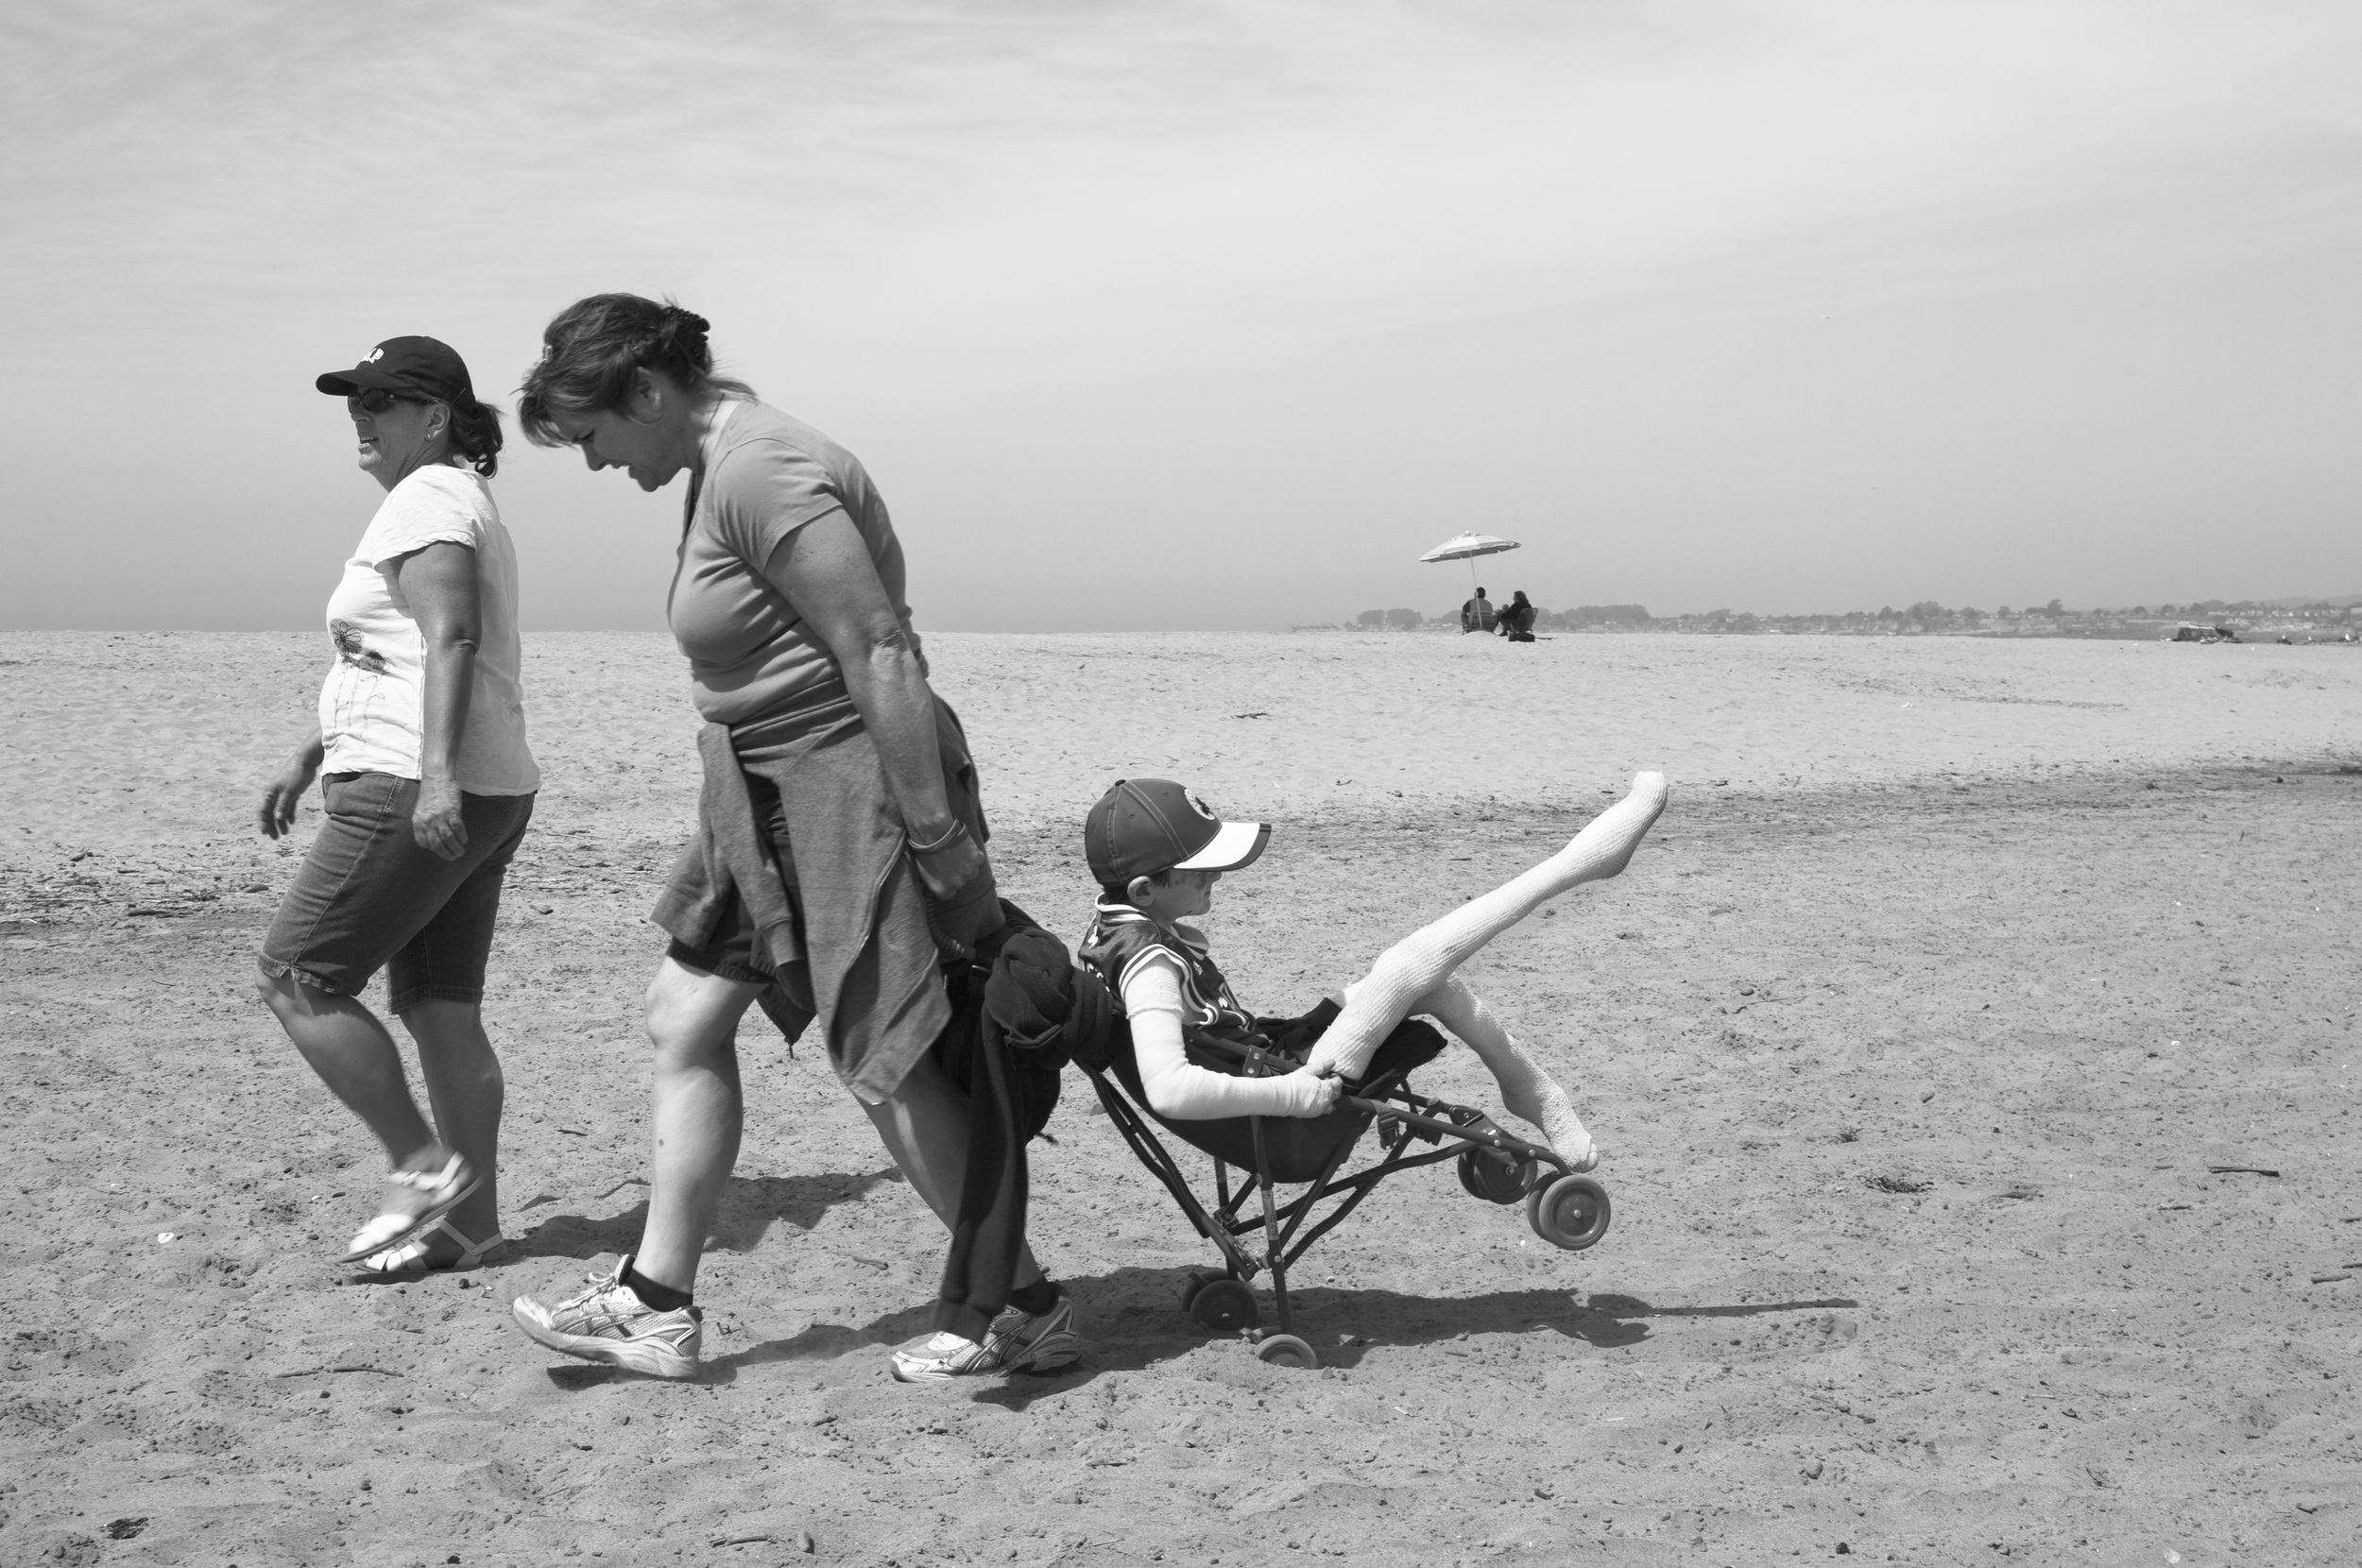  Lorraine Spaulding, pulls Garrett across the hot sand in a stroller to meet the rest of his class during a class field trip to the beach. Lorraine admits that ther life changed drastically after having Garrett who was born with Epidermolysis Bullosa